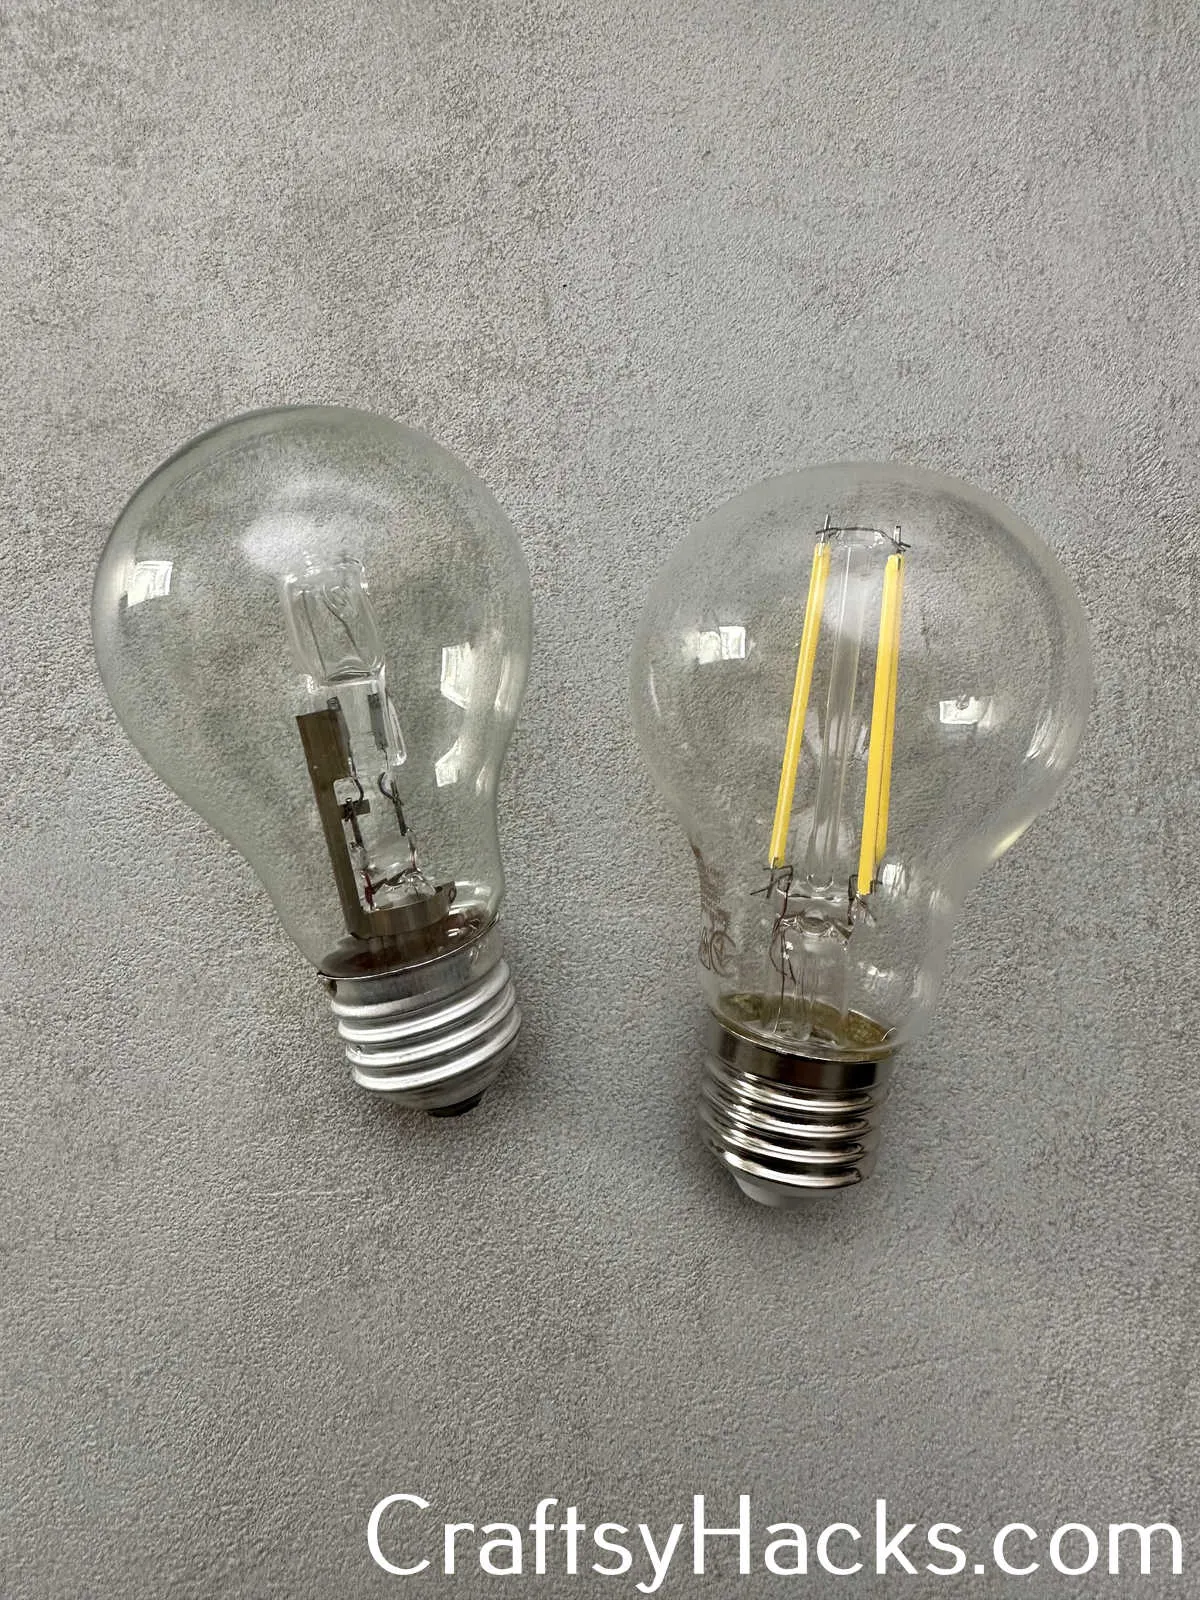 Replace Incandescent Bulbs with CFLS or LEDS